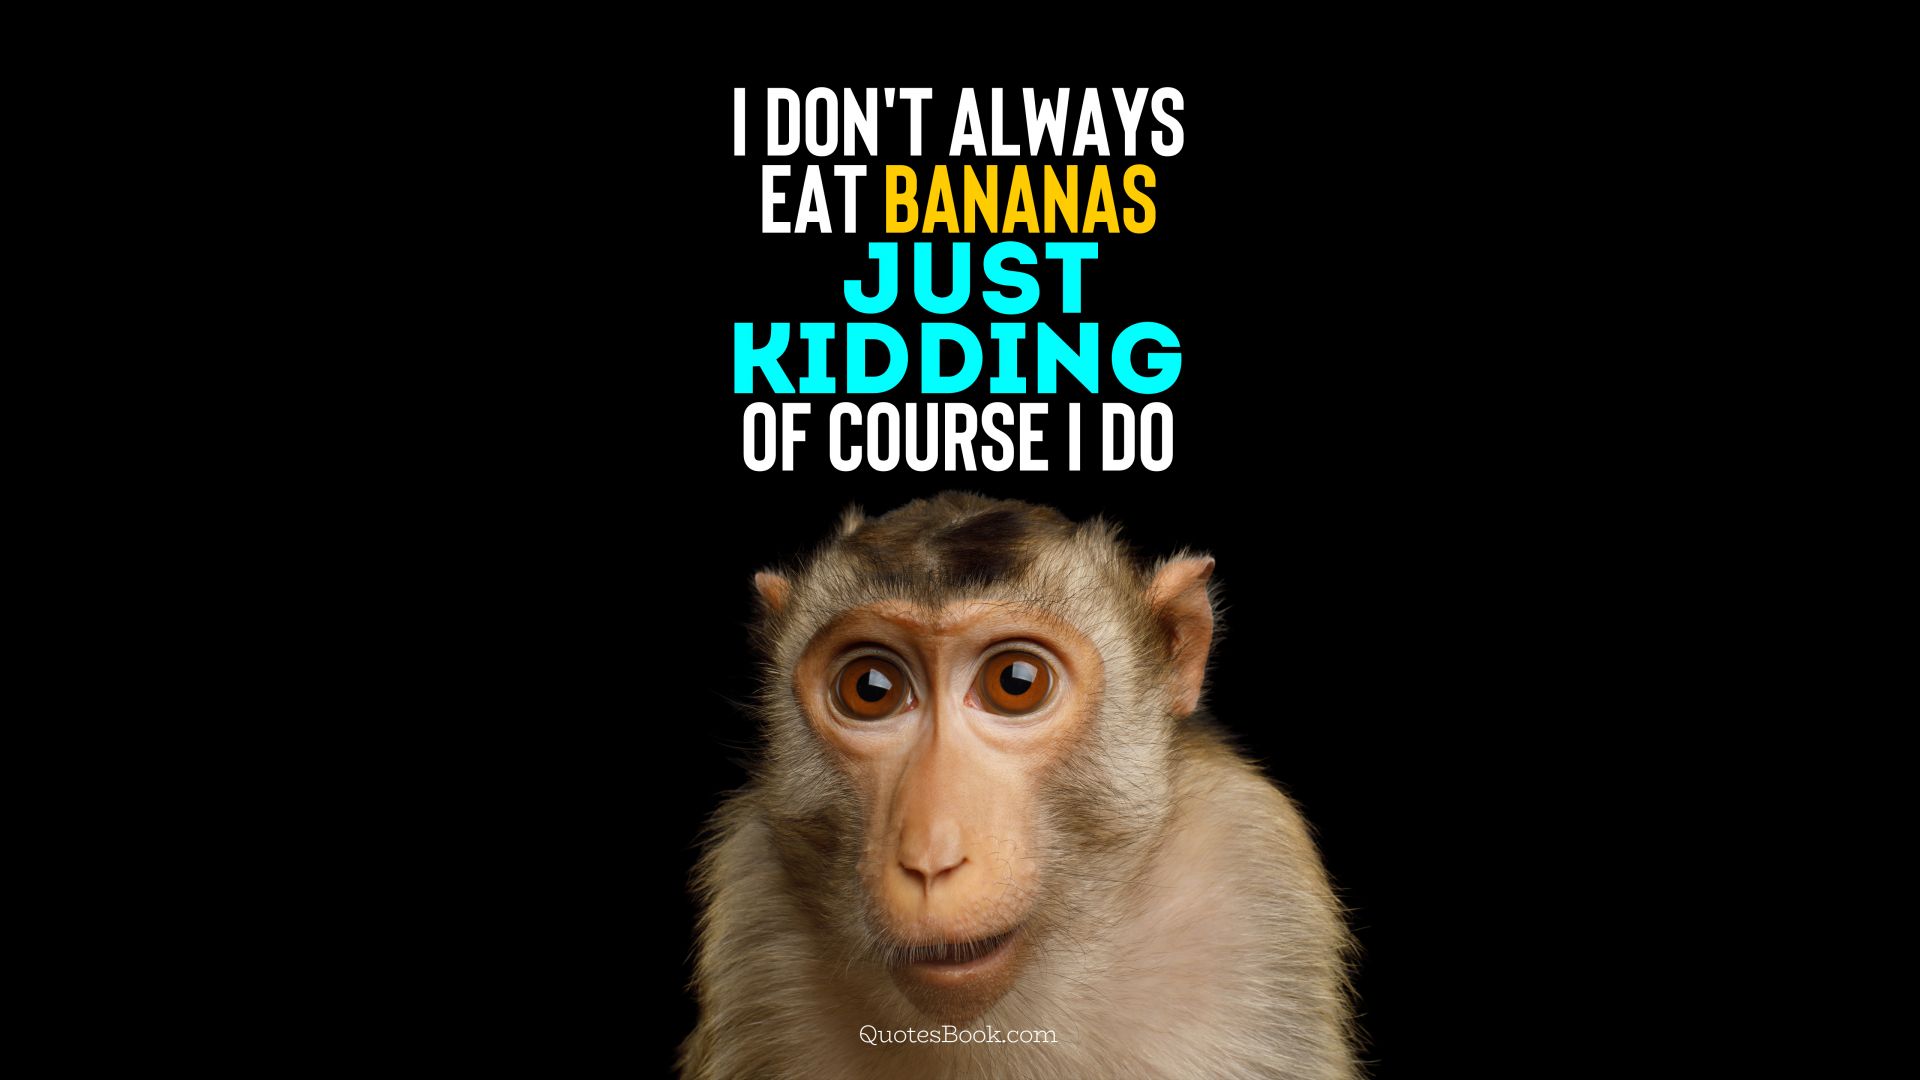 I don't always eat bananas just kidding of course I do